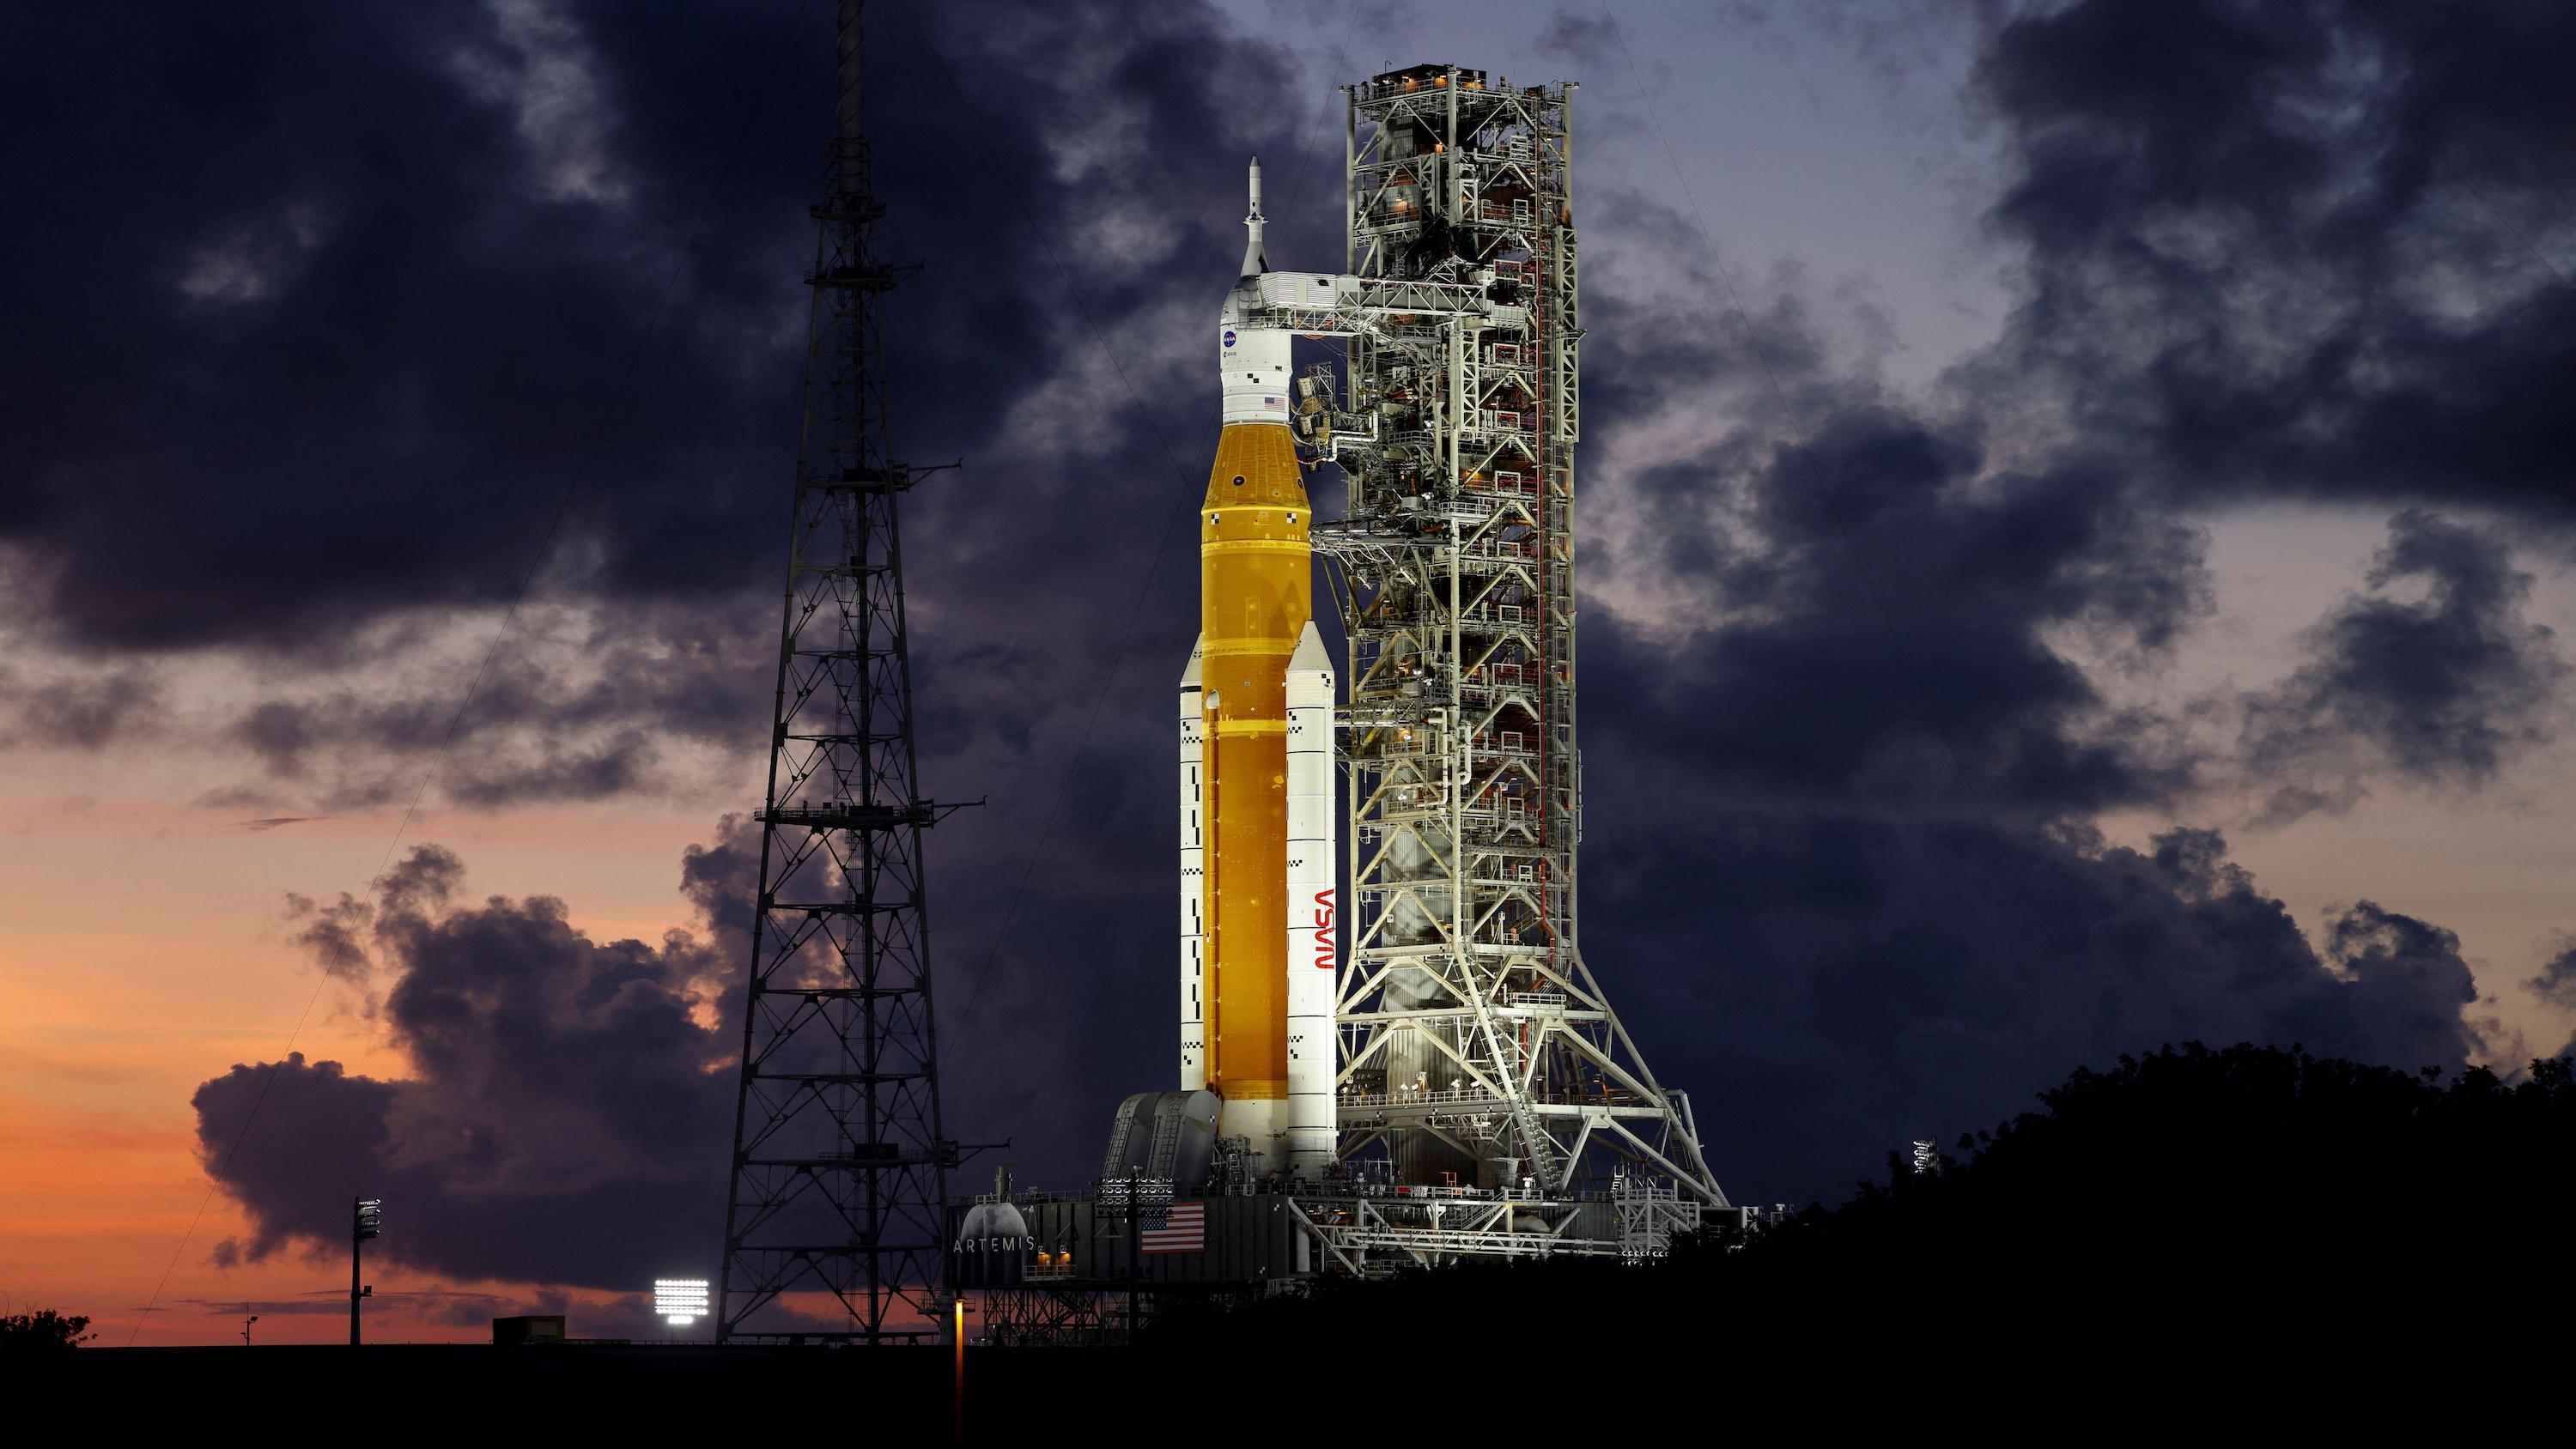 NASA's historic Artemis 1 moon mission will launch Wednesday. Here's